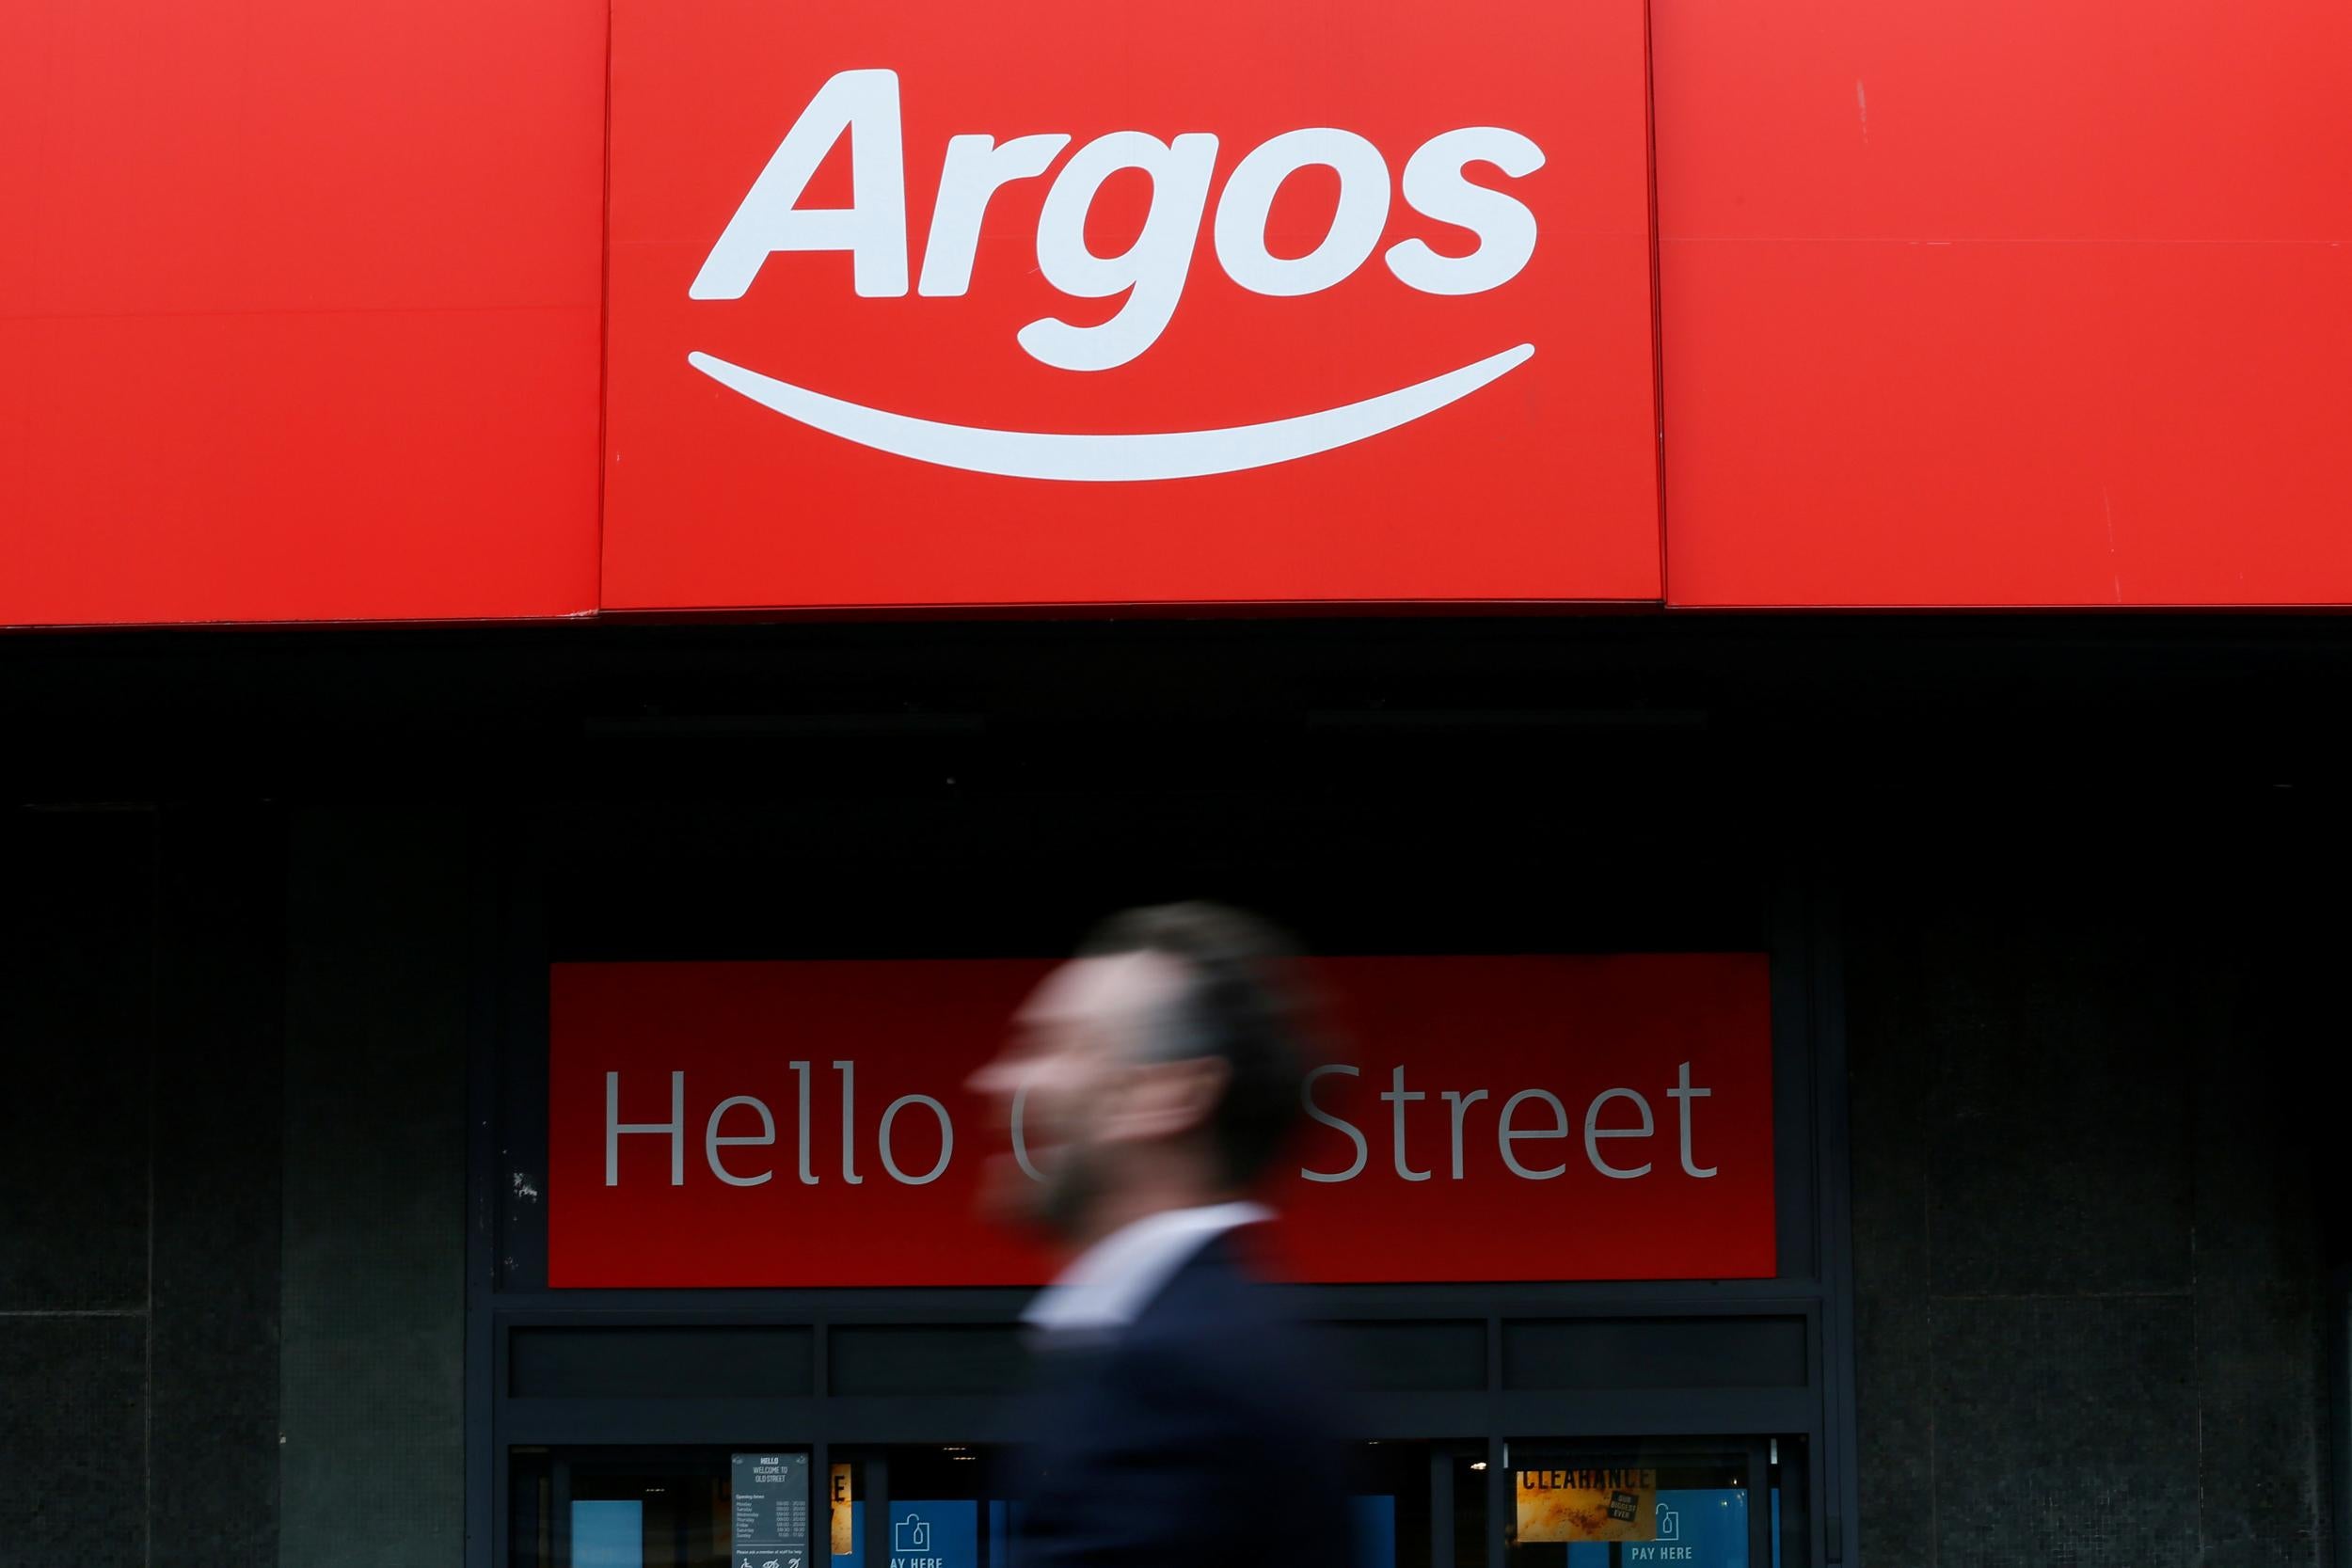 Action Fraud has warned Argos customers to beware of fake messages that lead to phishing websites